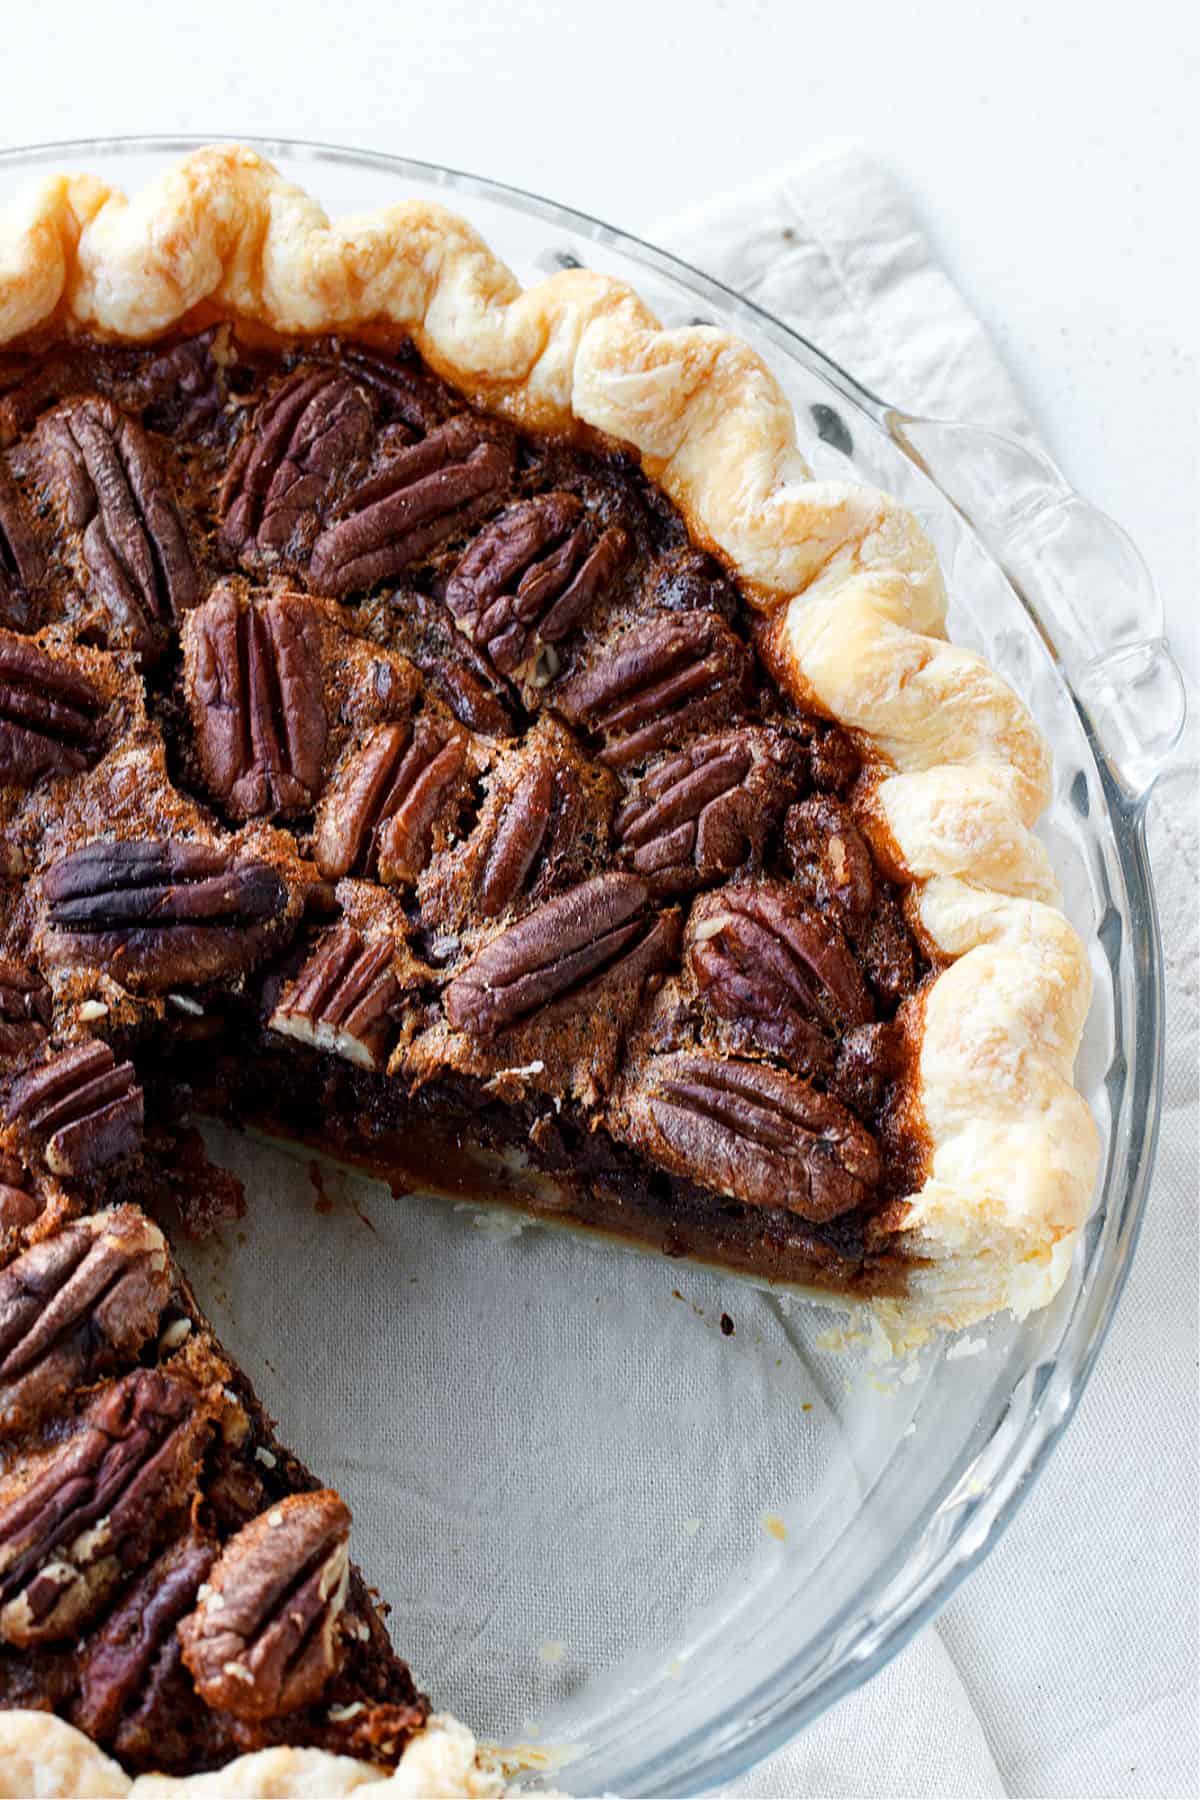 Partial view of pecan pie in glass dish on white table, one slice missing